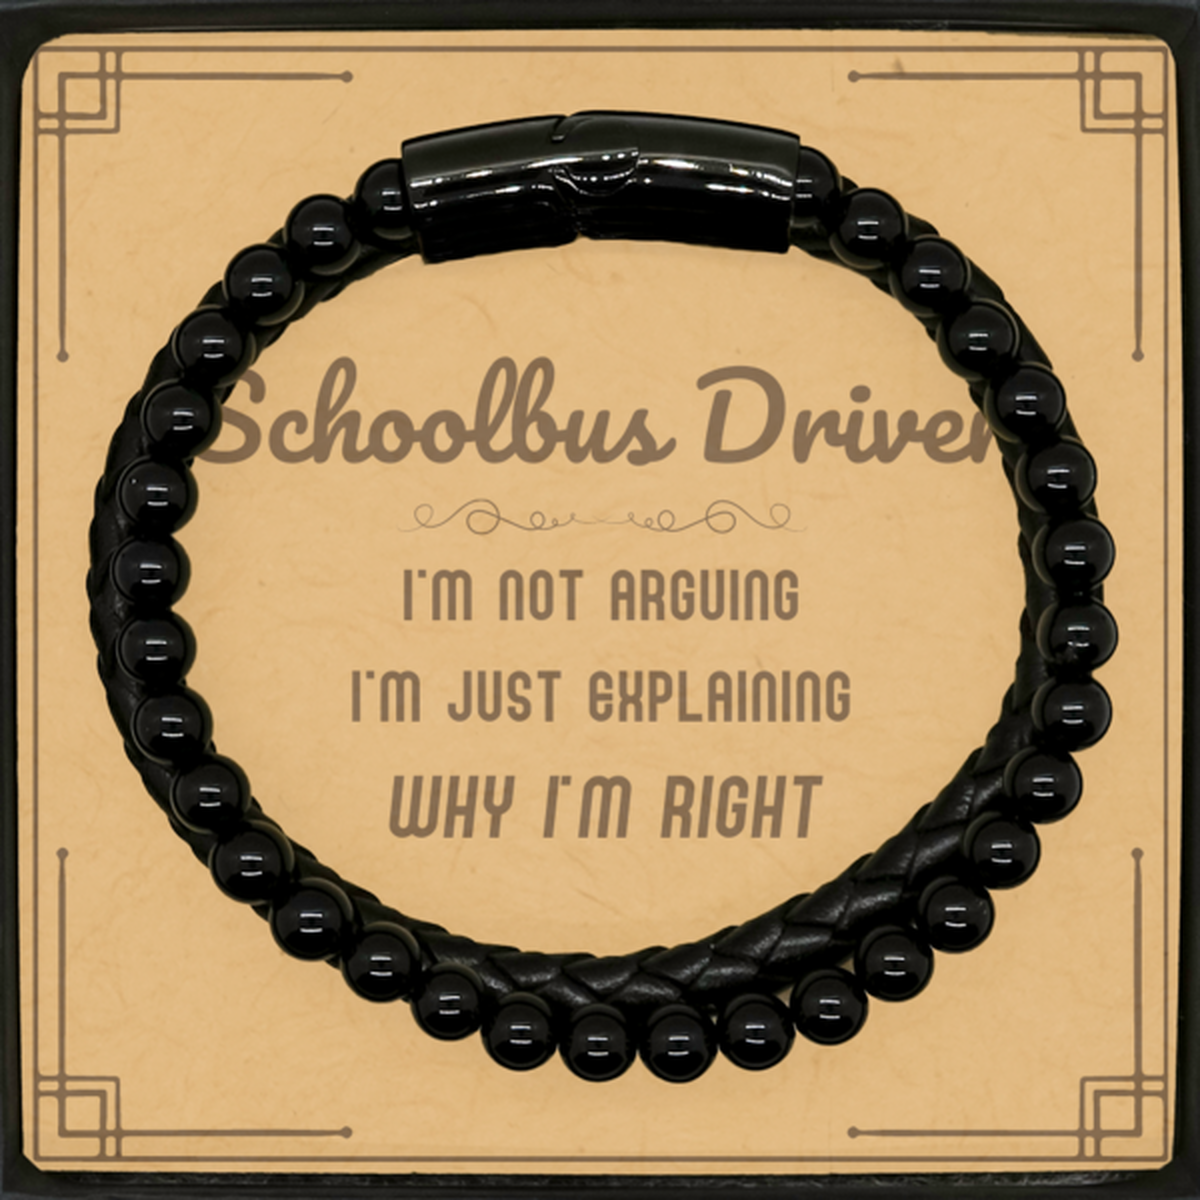 Schoolbus Driver I'm not Arguing. I'm Just Explaining Why I'm RIGHT Stone Leather Bracelets, Funny Saying Quote Schoolbus Driver Gifts For Schoolbus Driver Message Card Graduation Birthday Christmas Gifts for Men Women Coworker